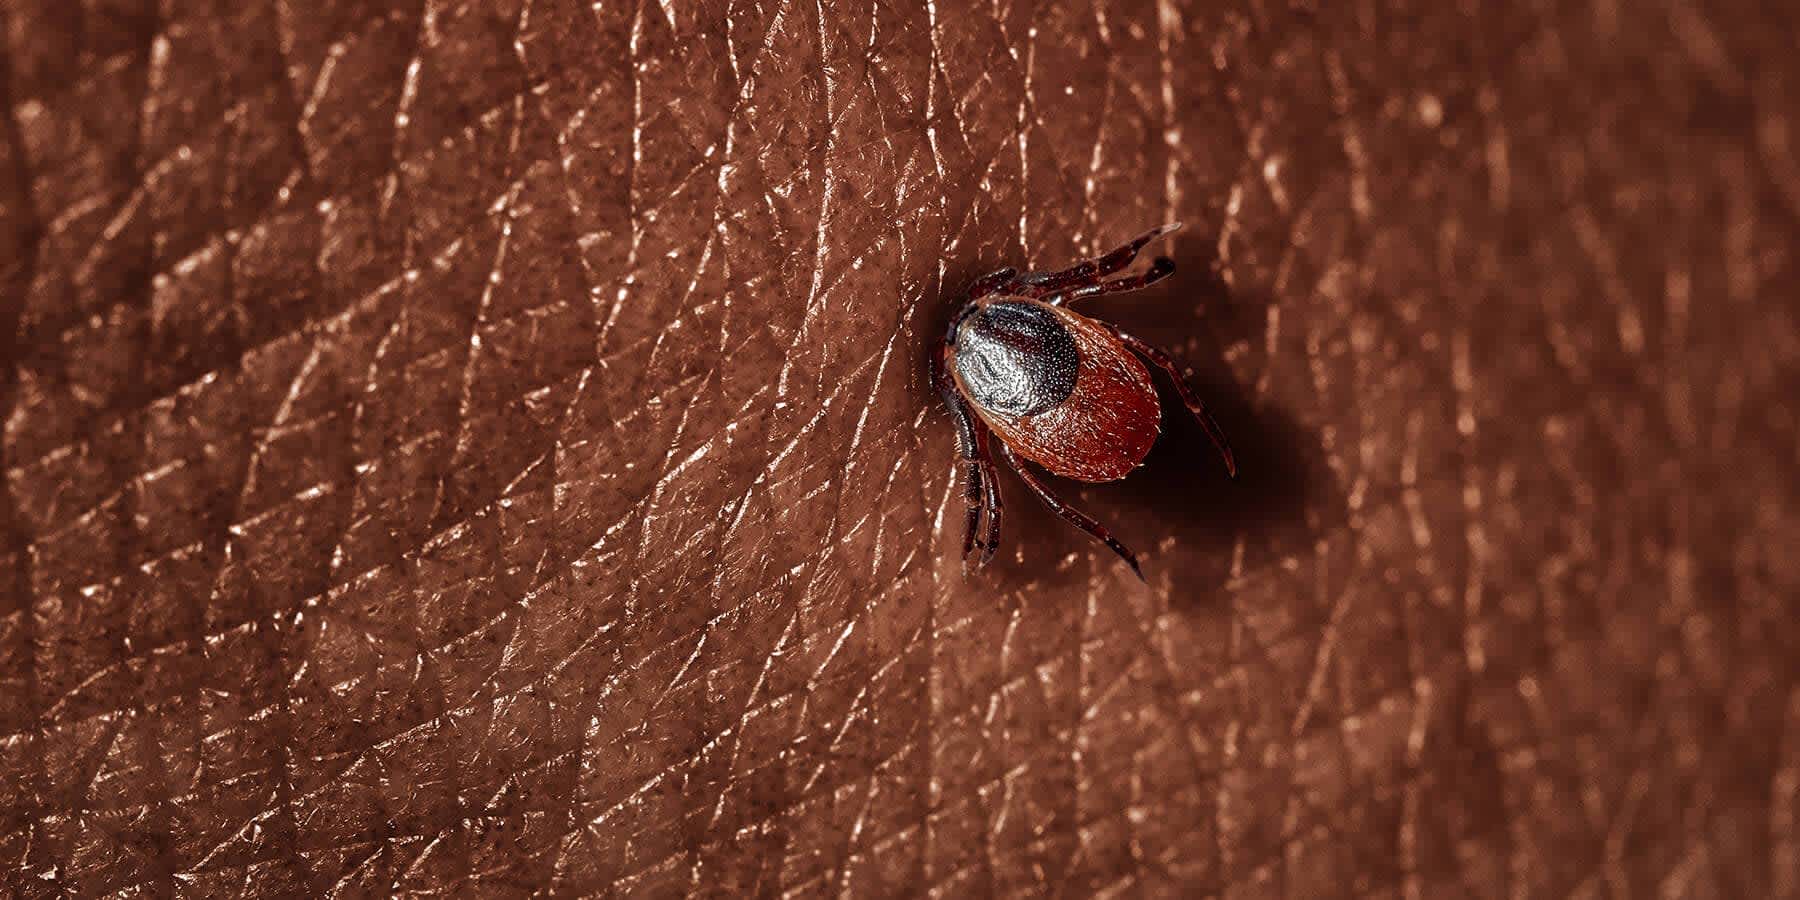 Tick with tick-borne disease burrowing into person's skin